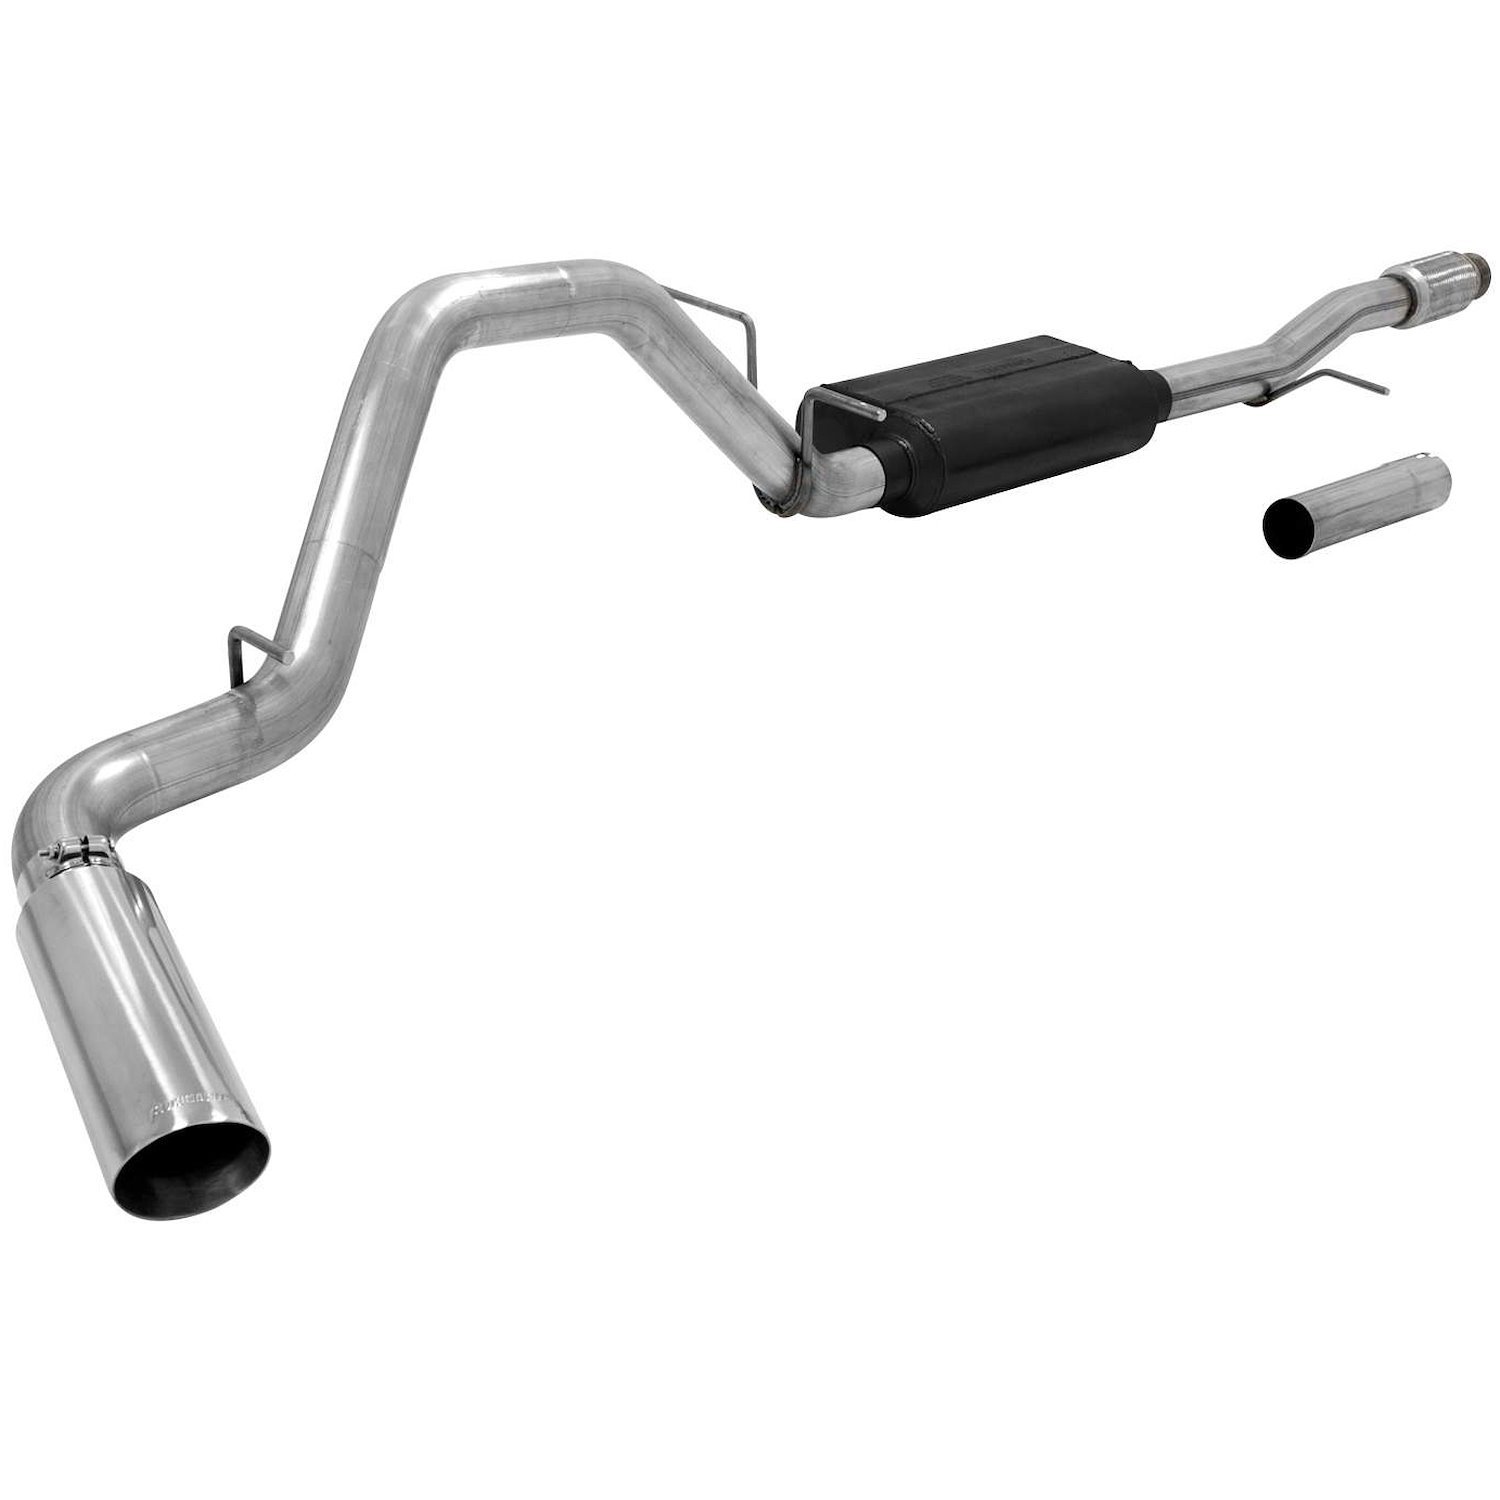 Force II Cat-Back Exhaust System 2014-2018 GM Silverado/Sierra 1500 5.3L (Crew/Double Cab/Short/Long Bed)